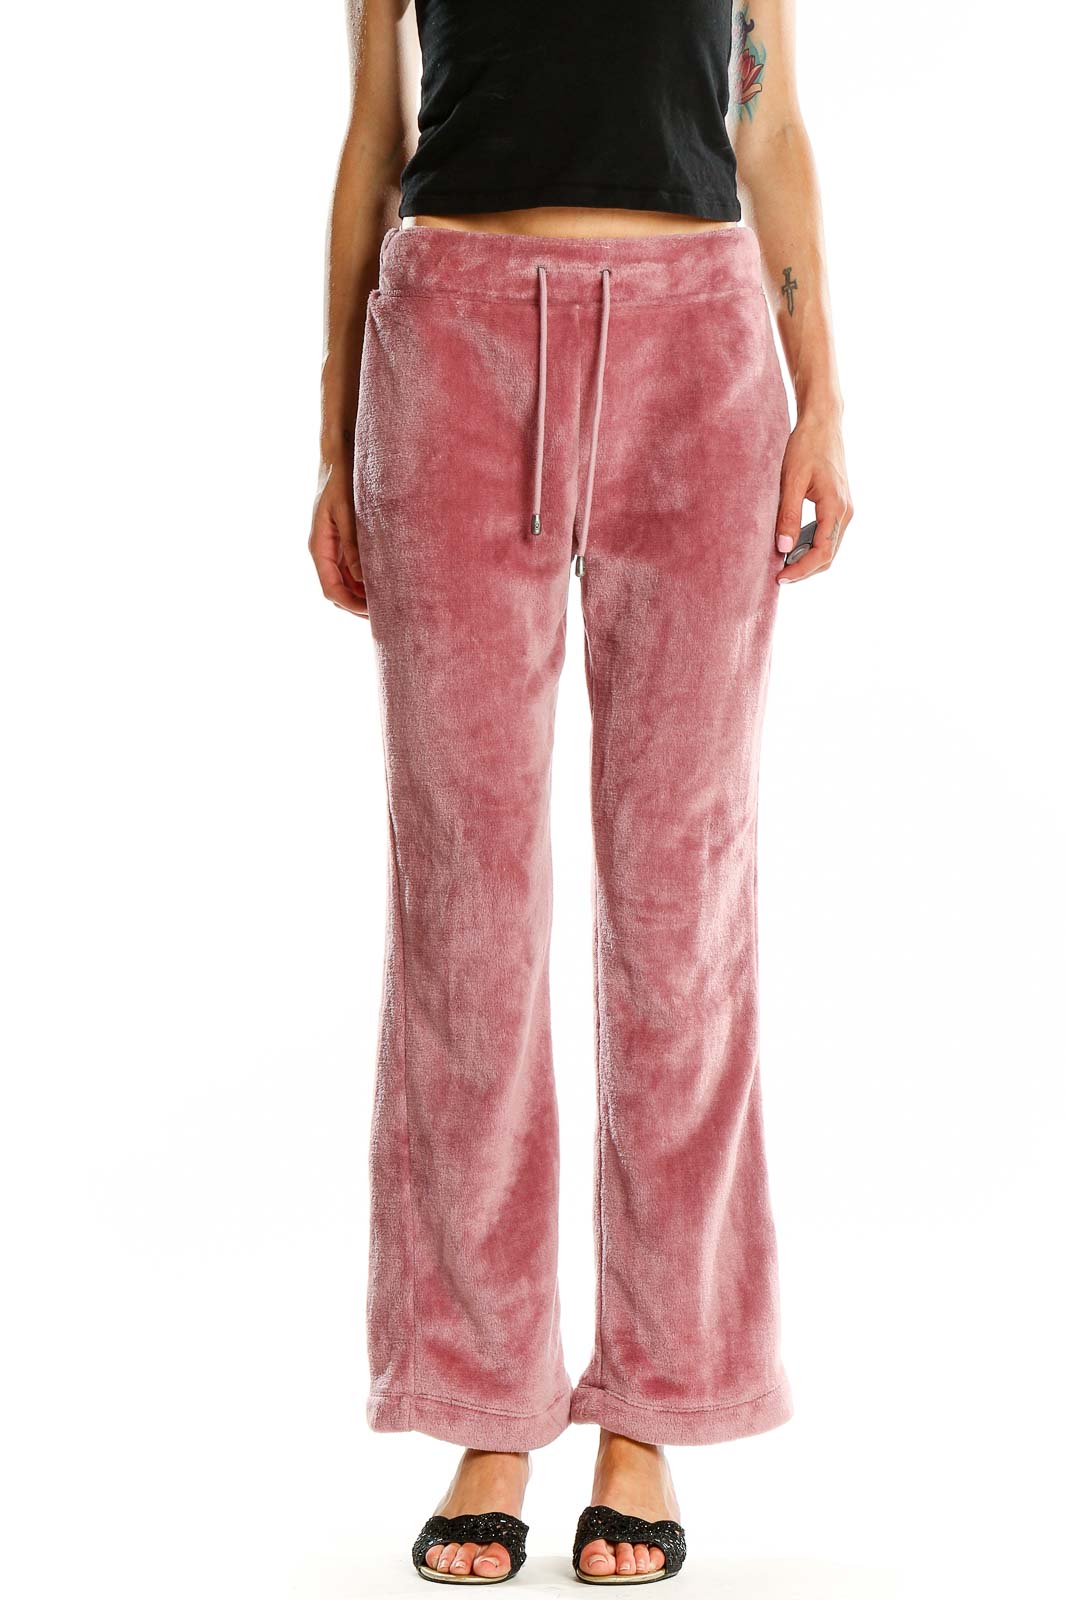 Pink Fuzzy Pants Front